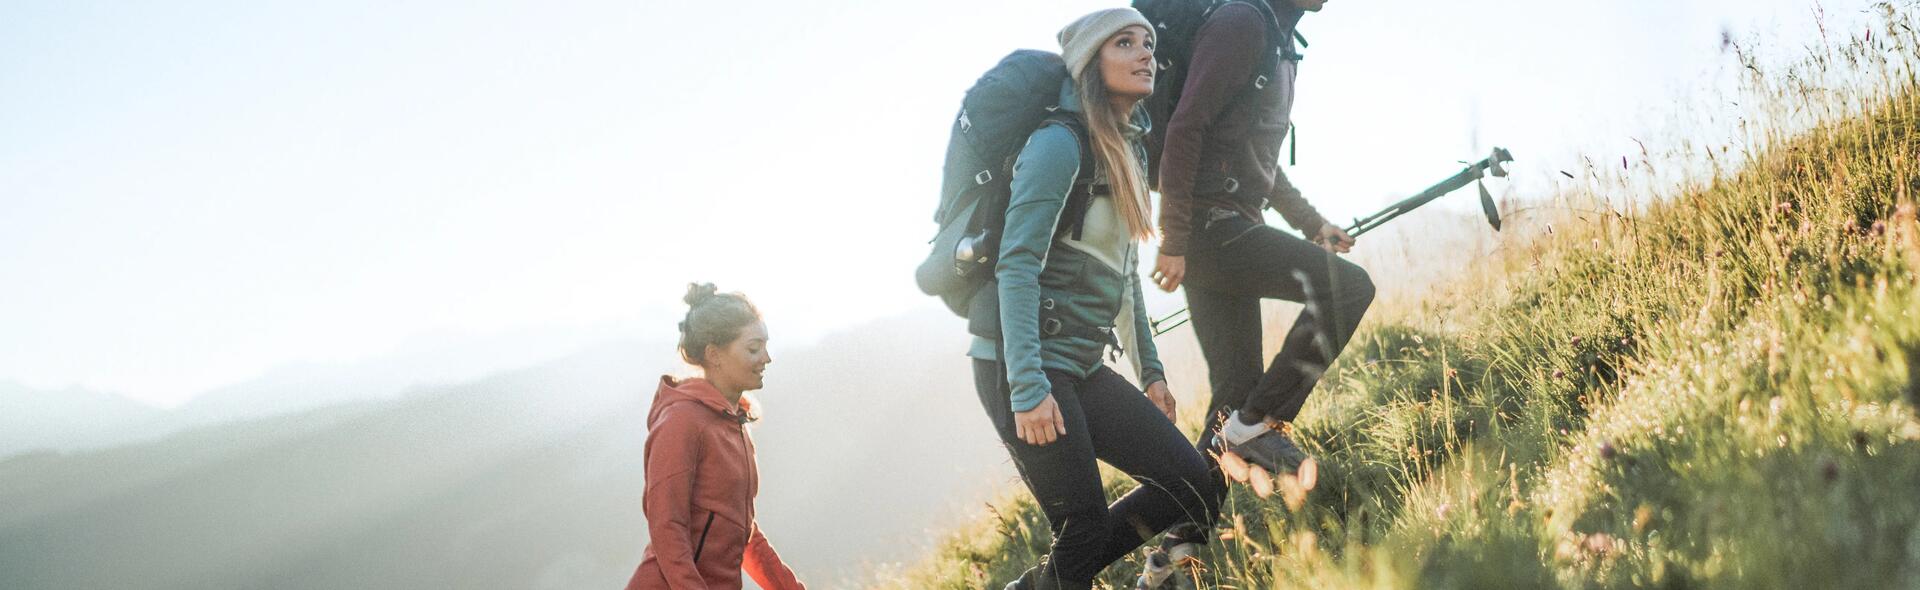 FIND ALL OUR CAMPING AND HIKING TIPS